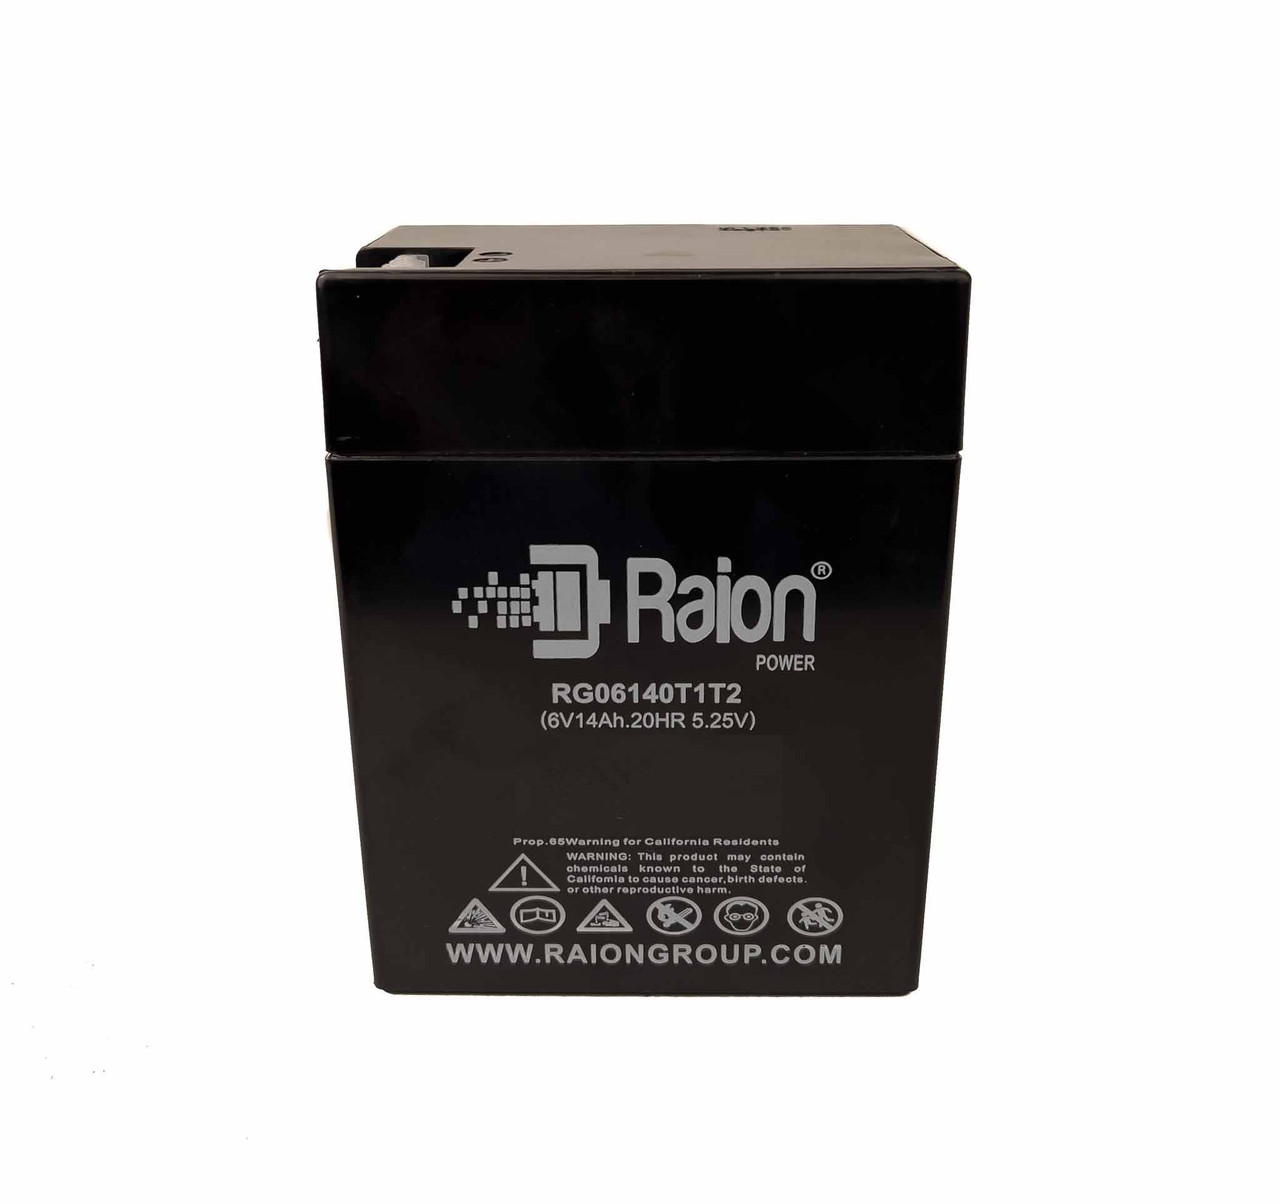 Raion Power RG06140T1T2 6V 14Ah Replacement T1T2 Battery Terminals for Cycle Sound Raider 550 76124-9563